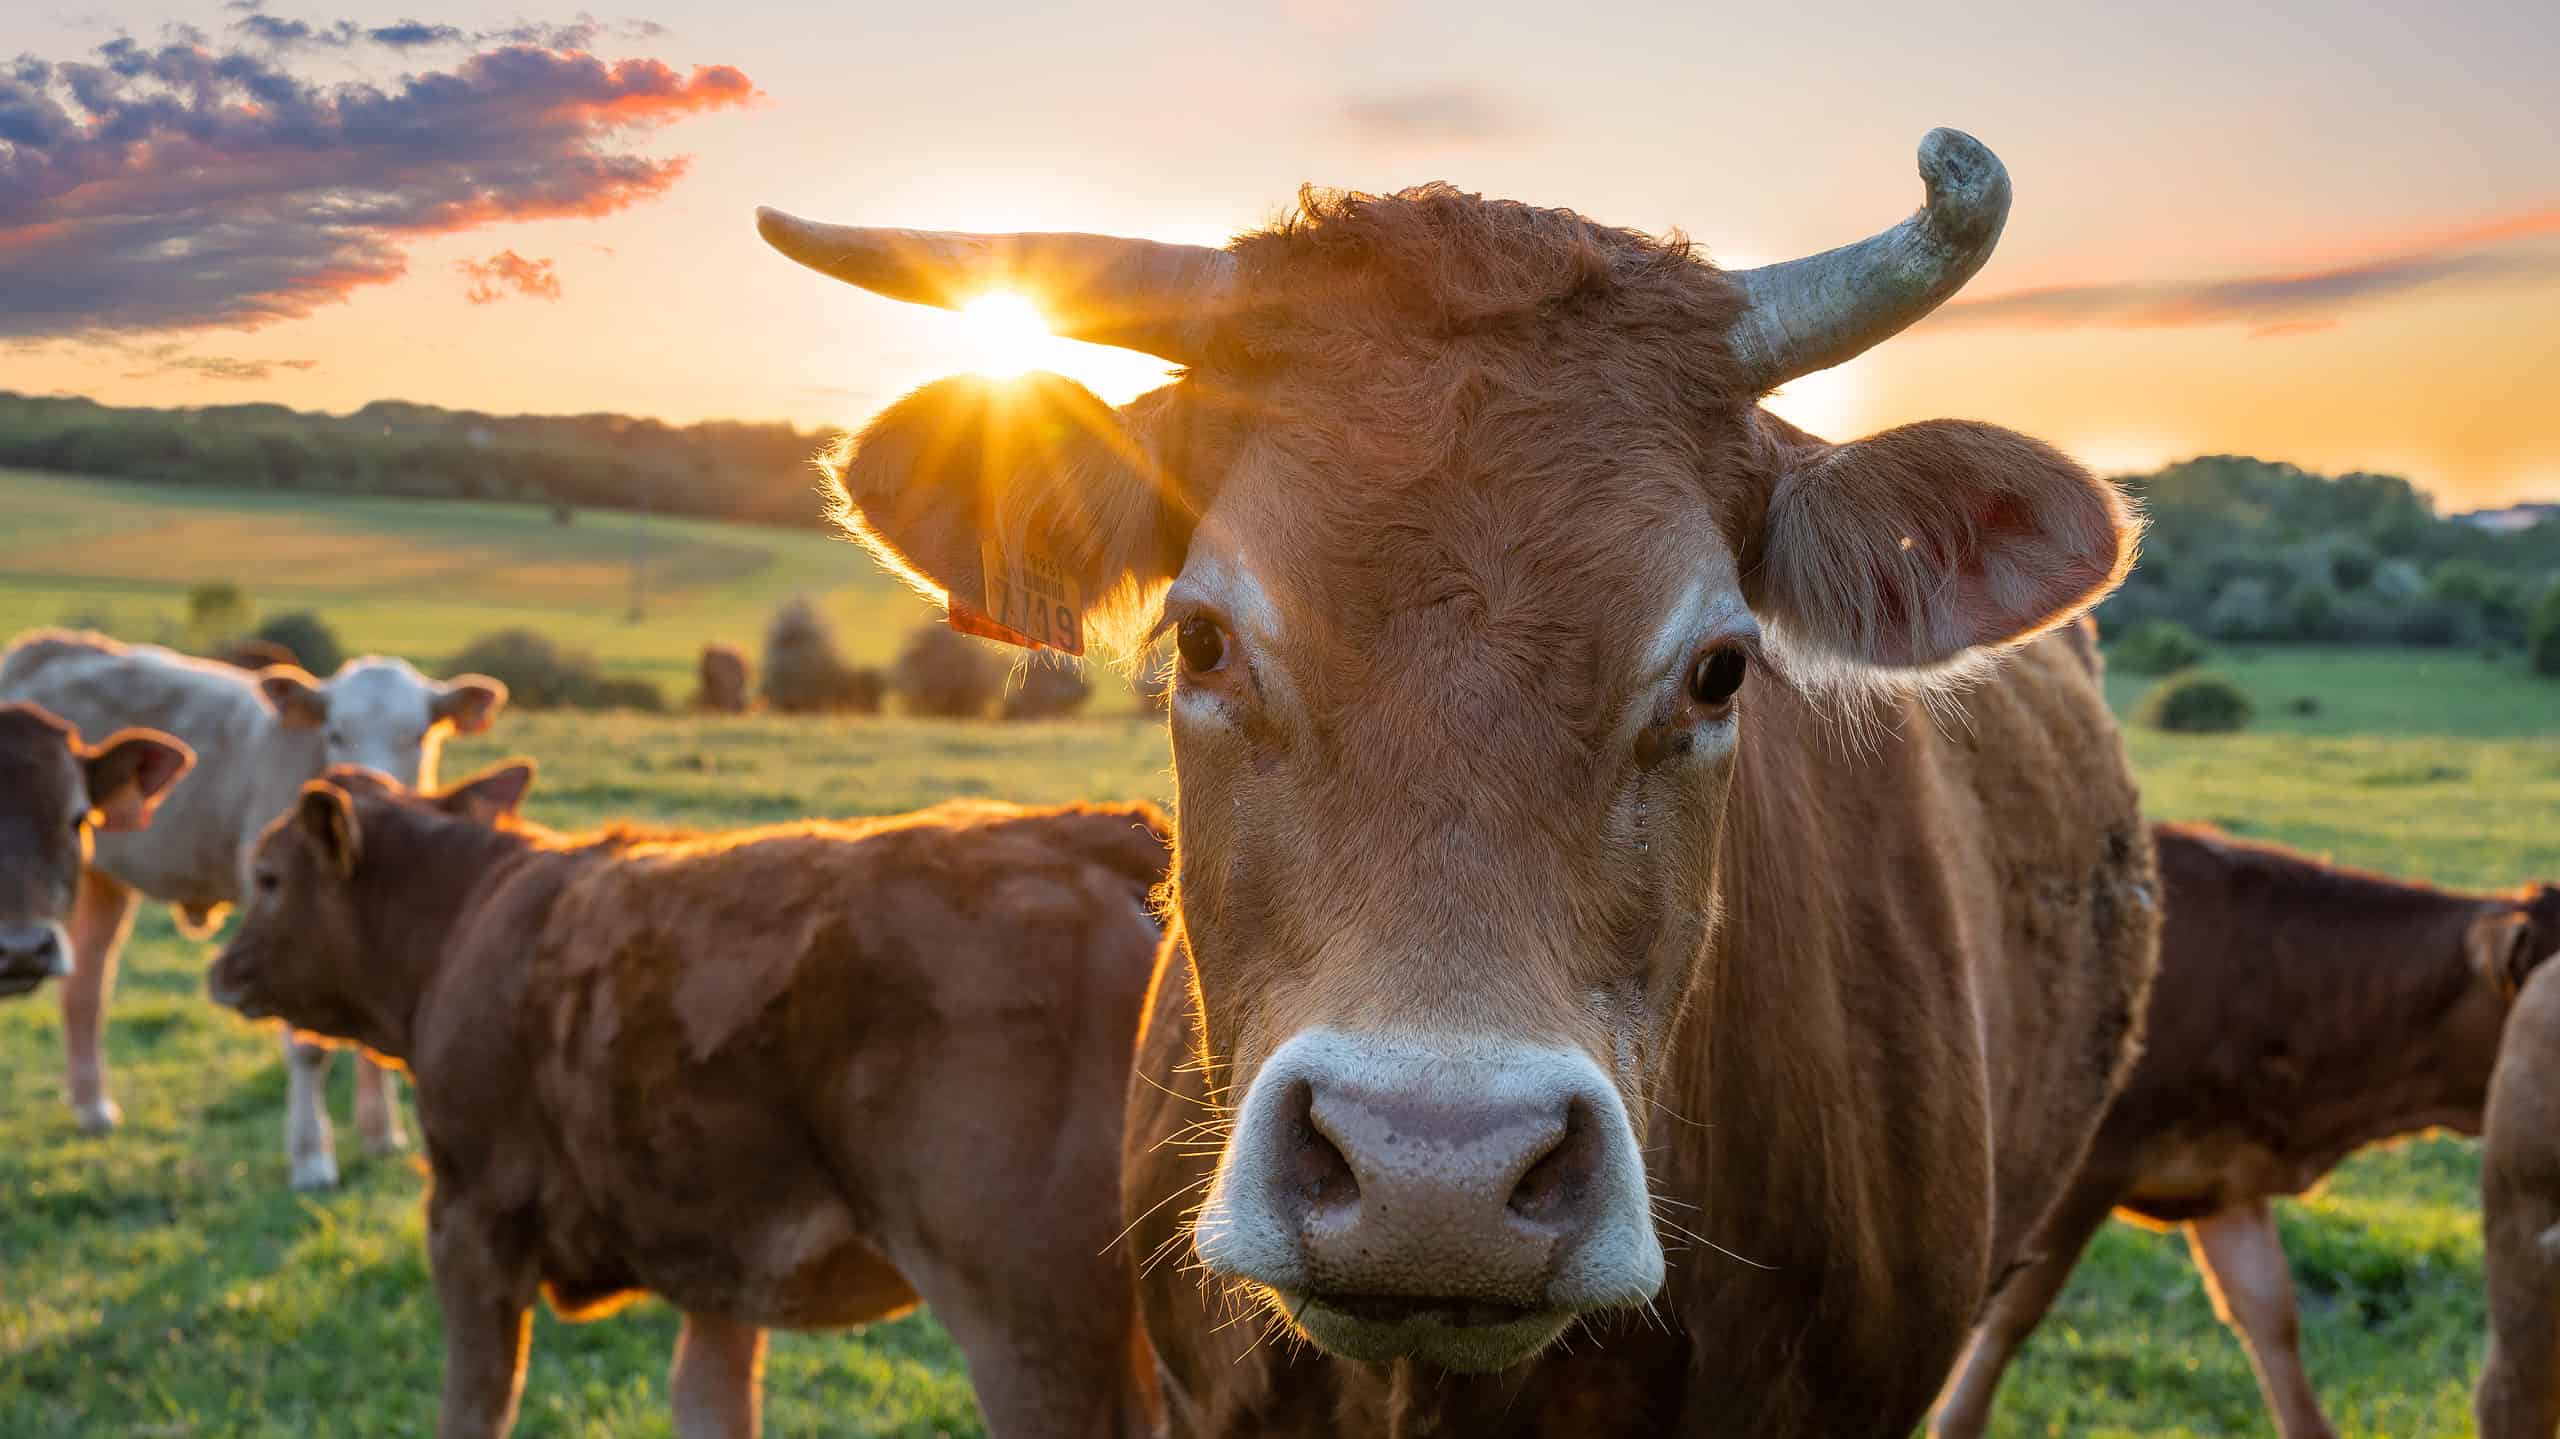 Cow looking directly at camera